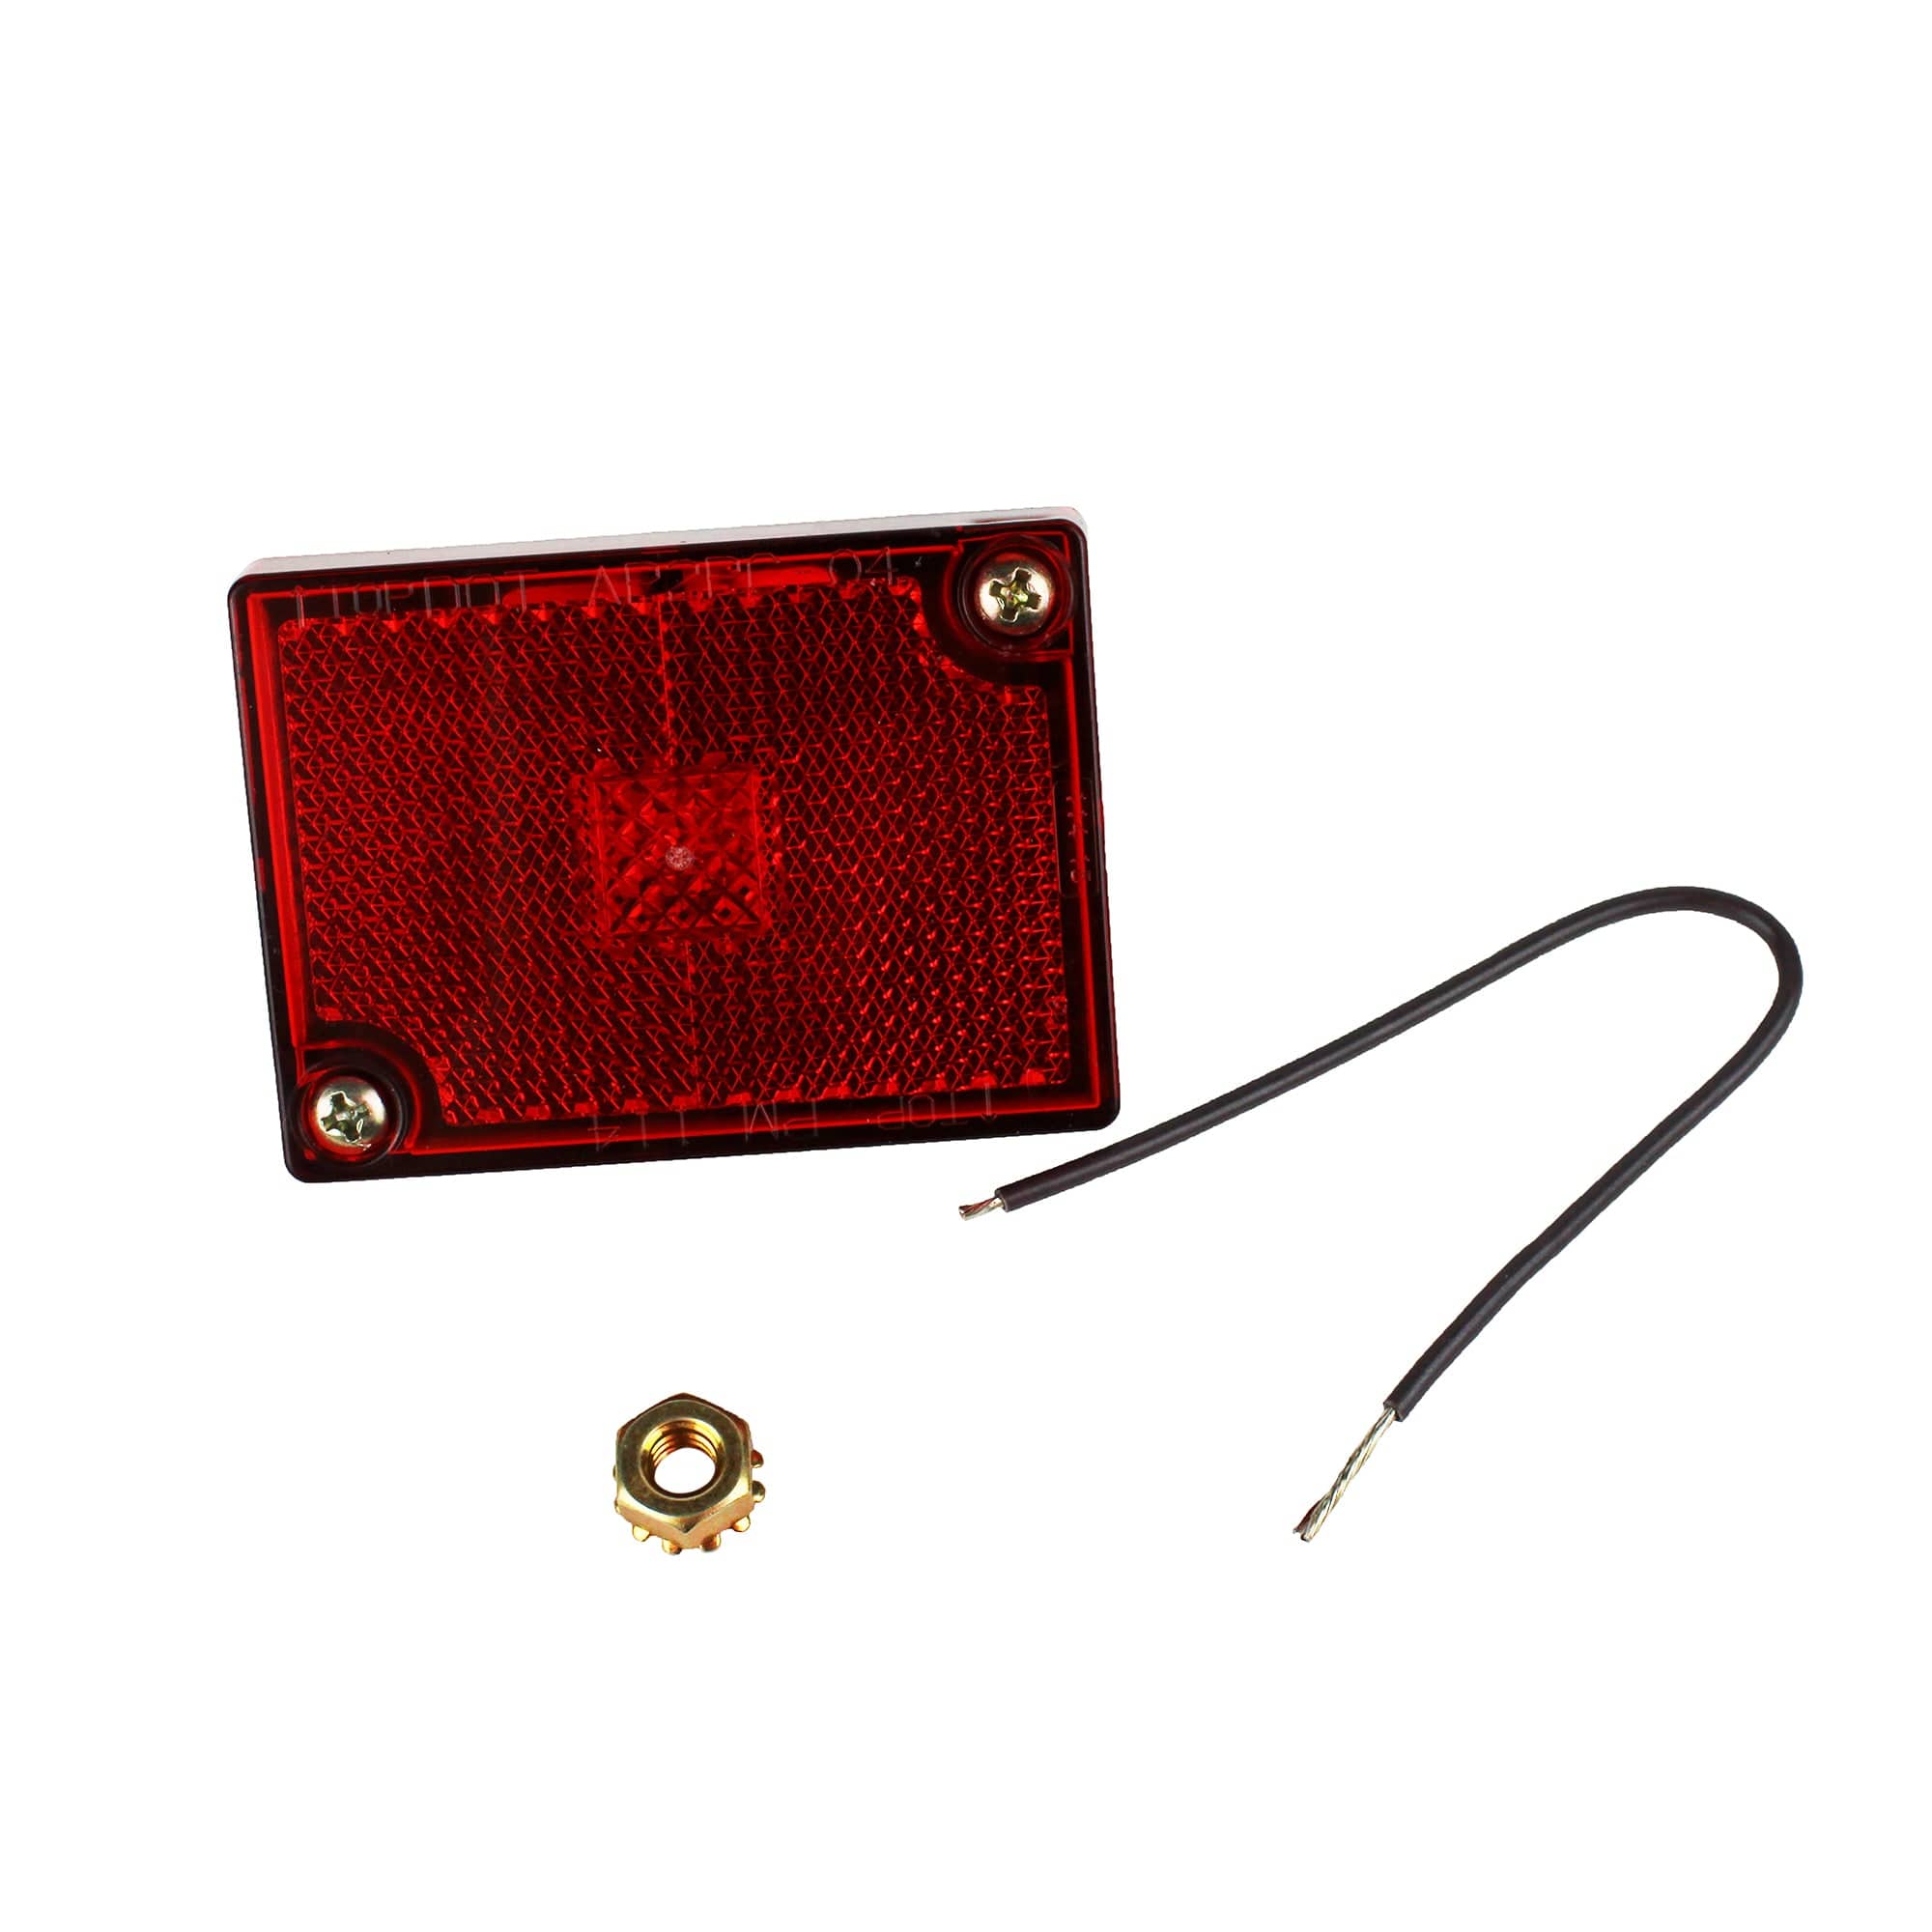 Anderson Marine E114R Rectangular Clearance Light - Red